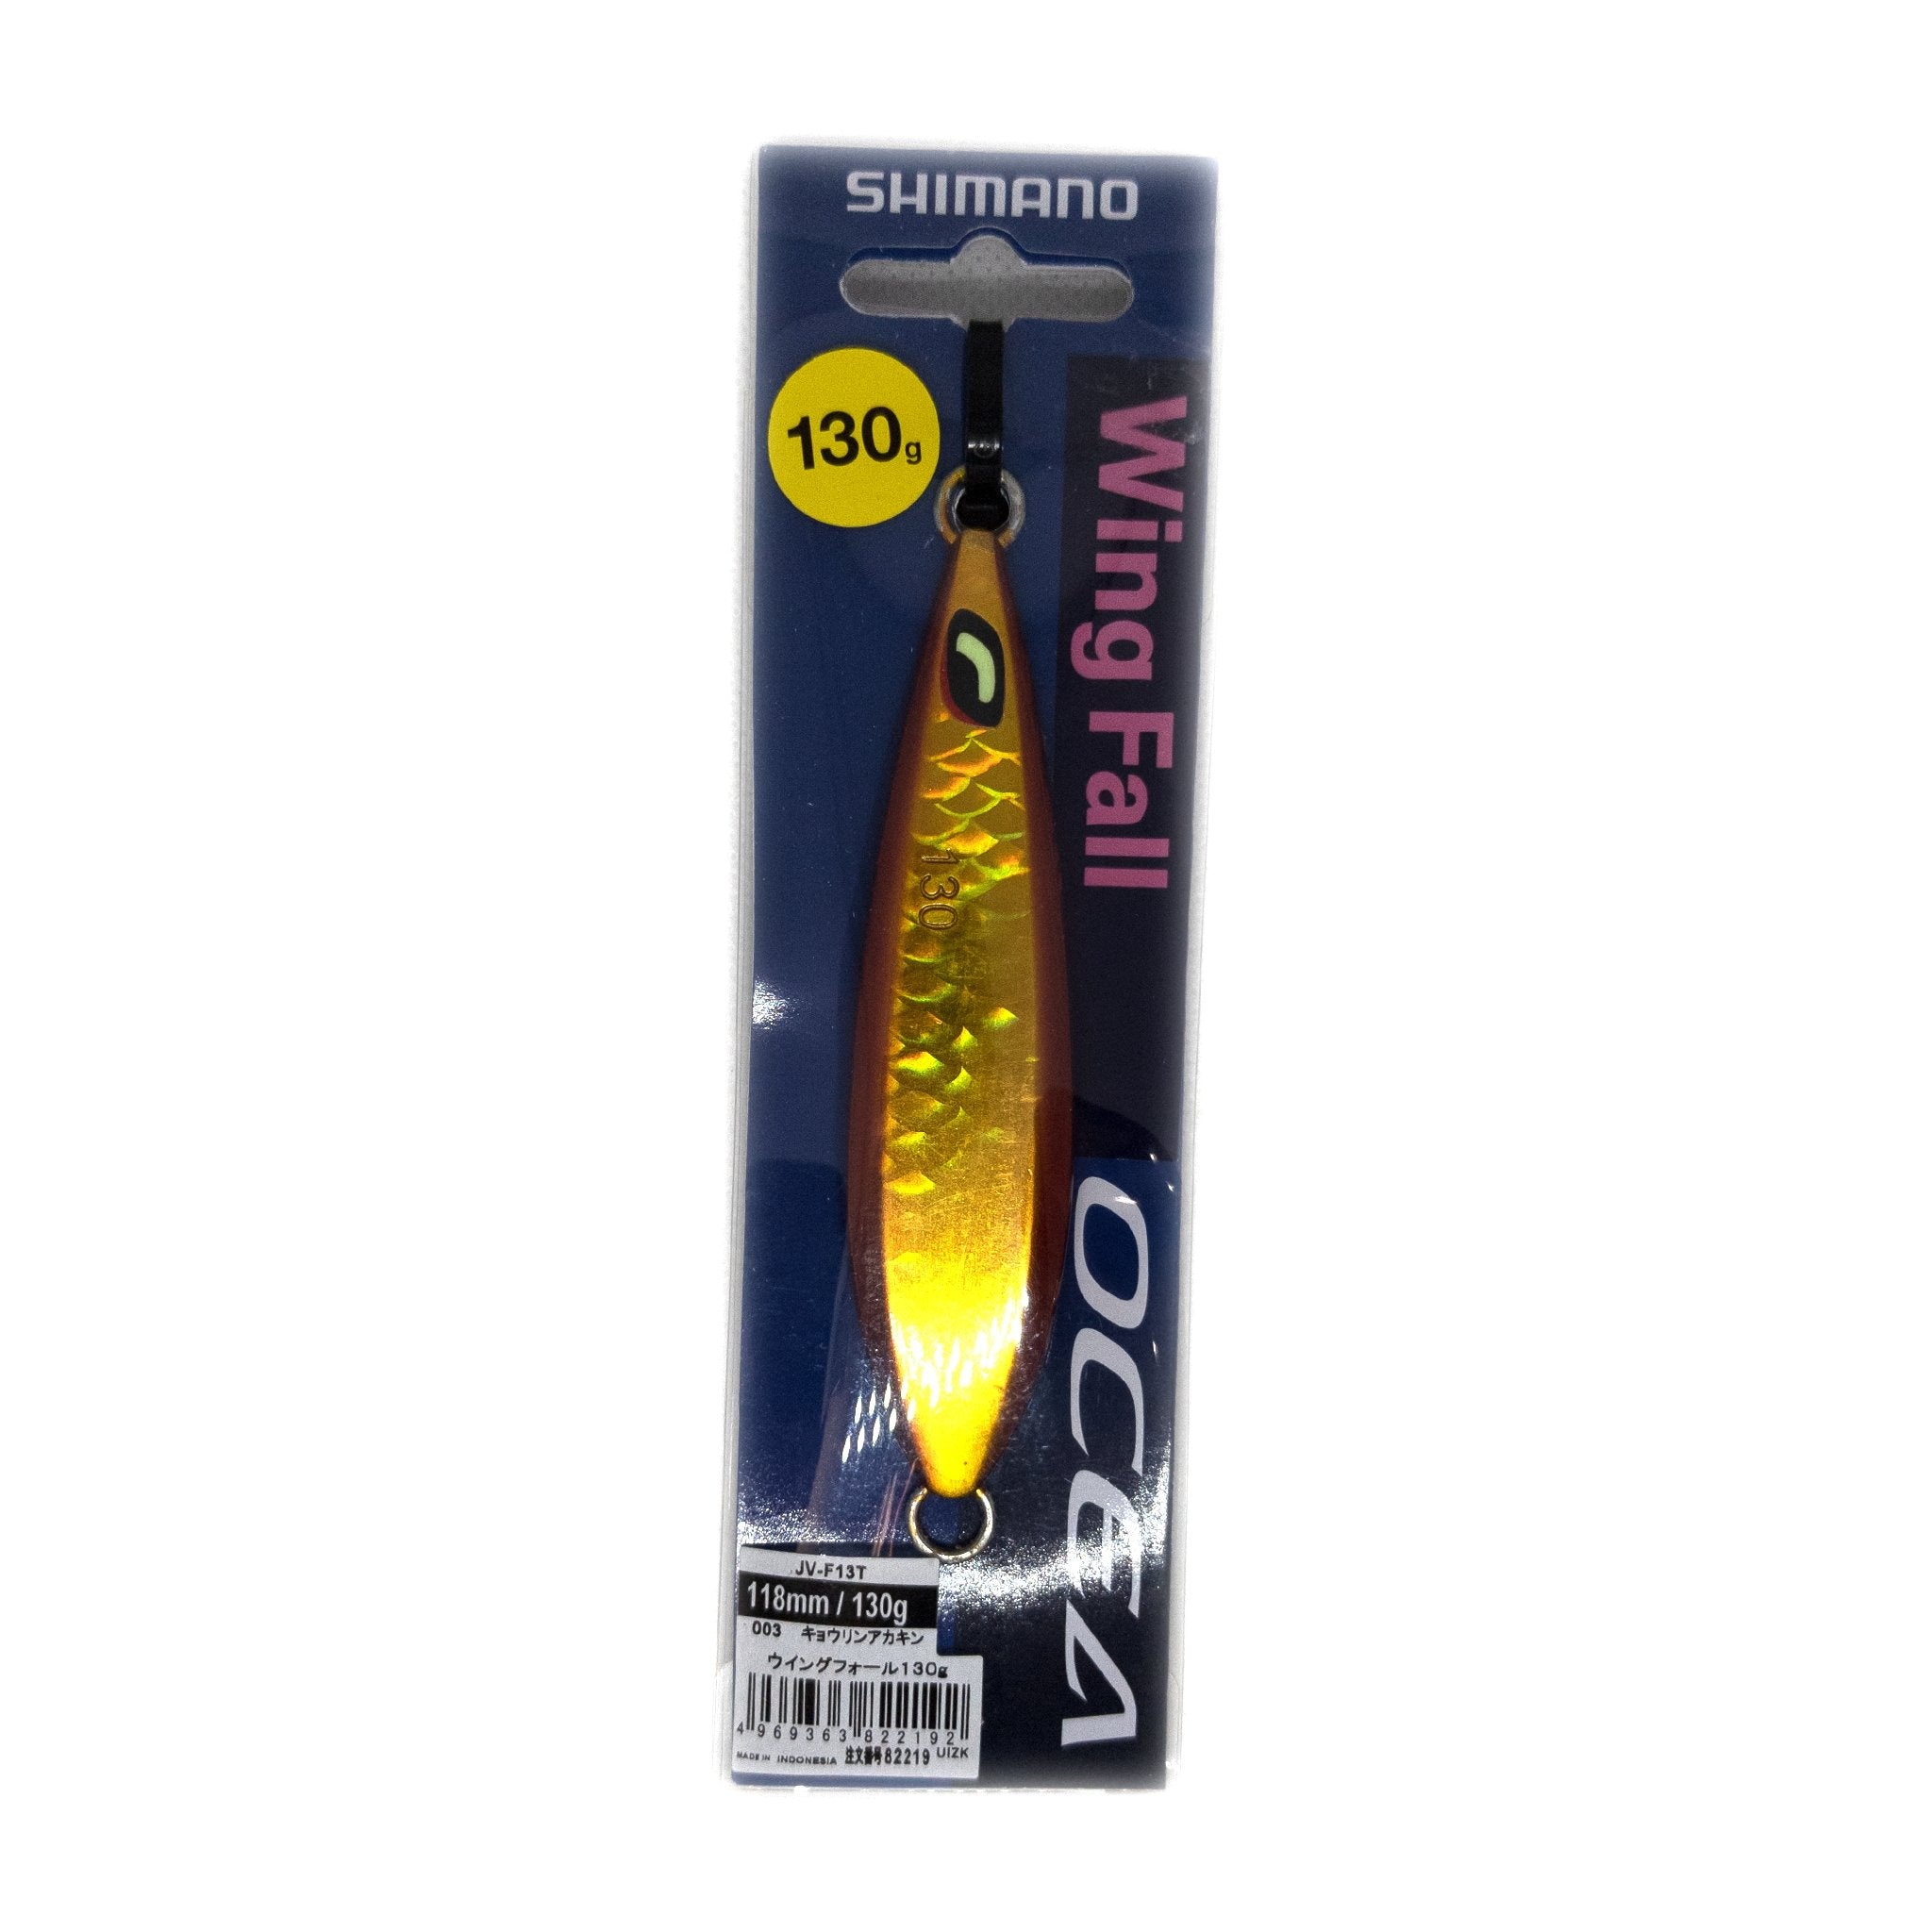 Shimano Ocea Wing Fall Jig 130g Color "Red Kin" - The Borrowed Lure